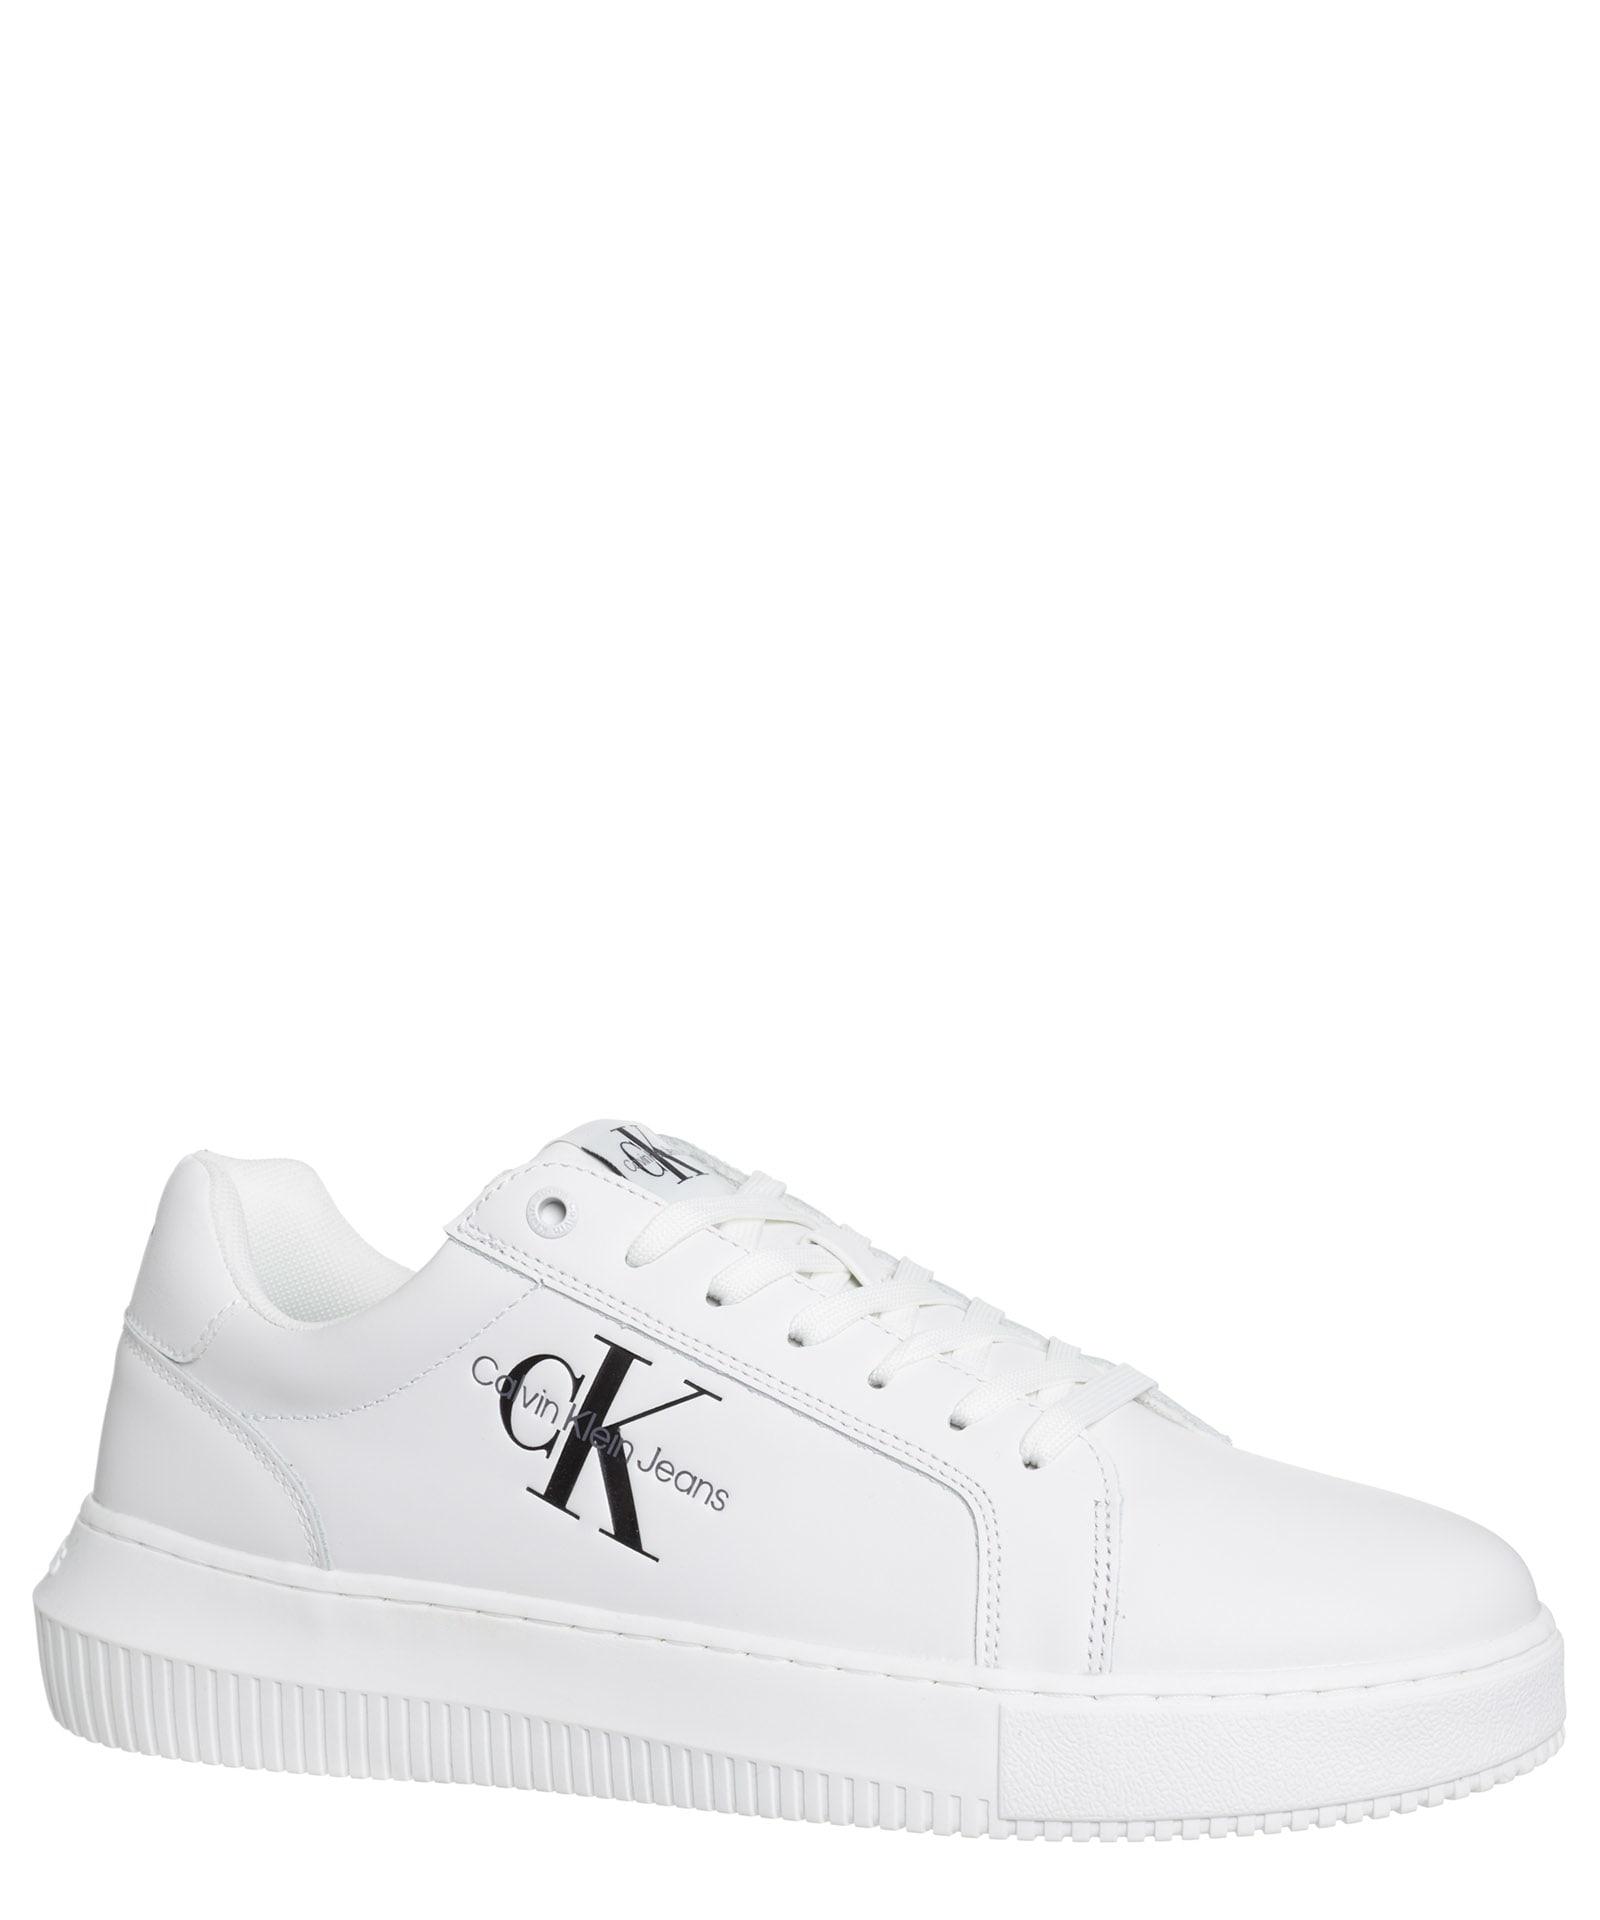 Calvin Klein Leather Sneakers in White for Men | Lyst